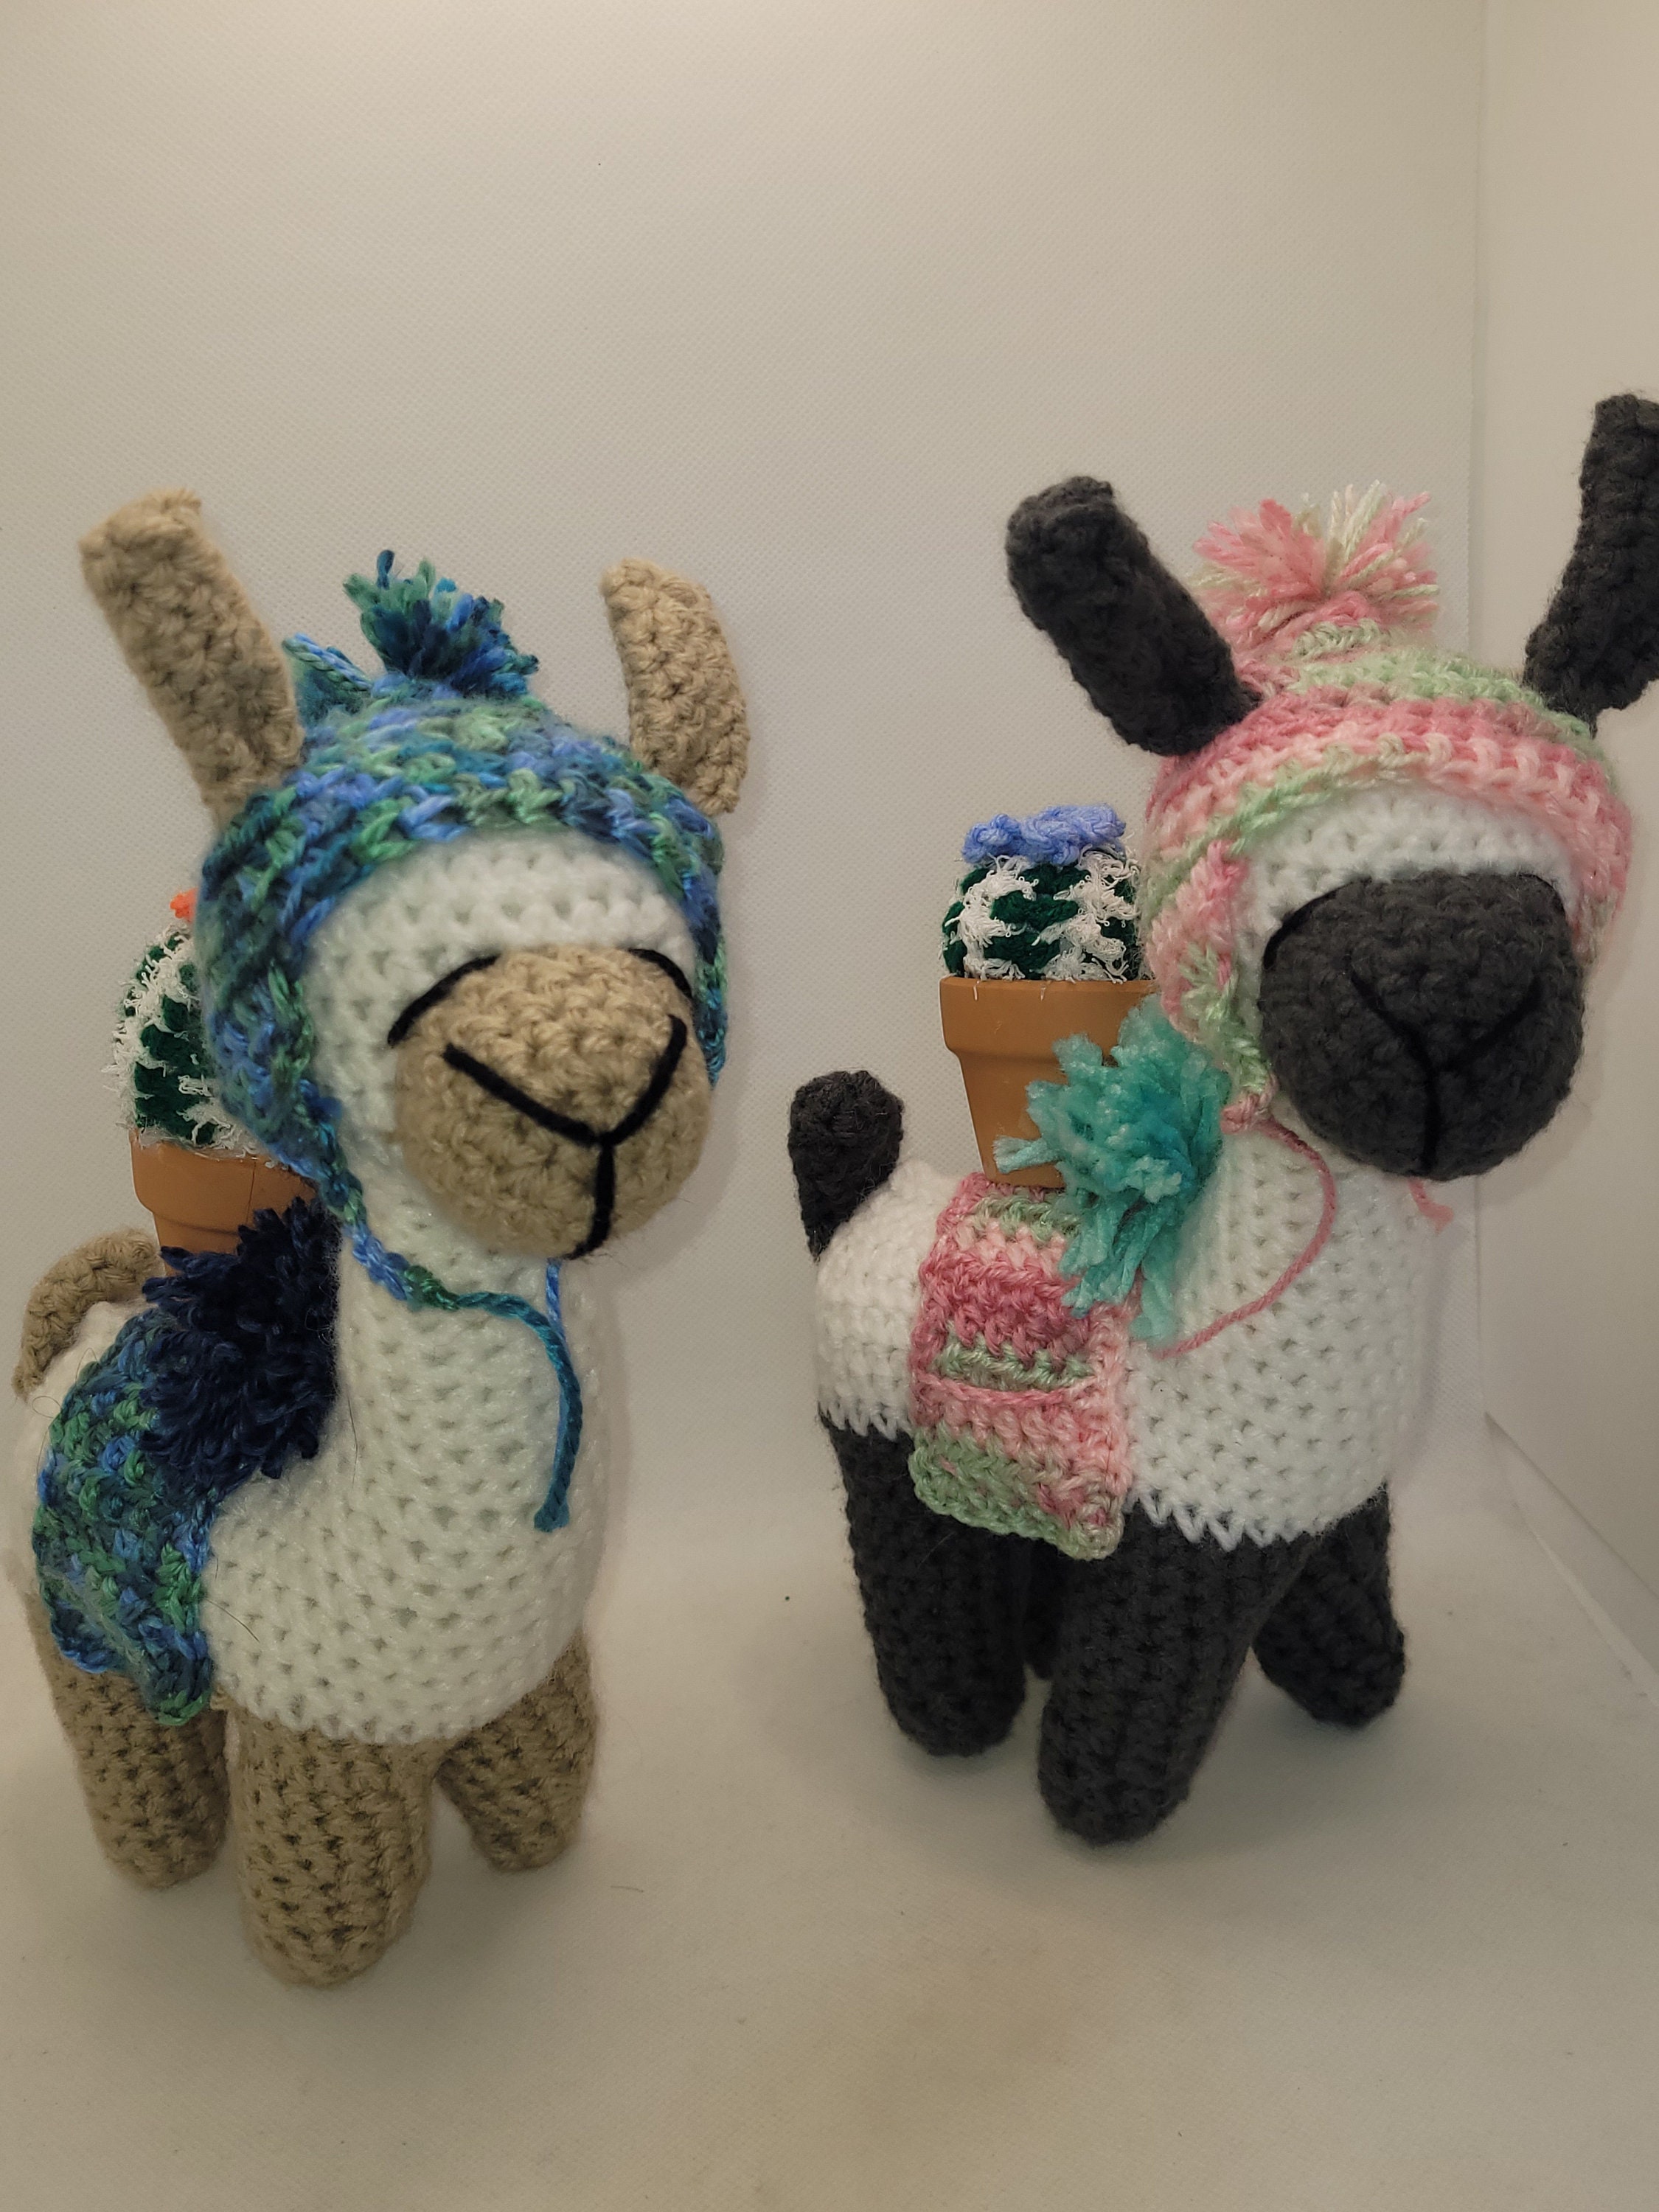 Party Llama Project Bag for Knitters, Crochet, Cross Stitch, Craft  Organization and Storage 